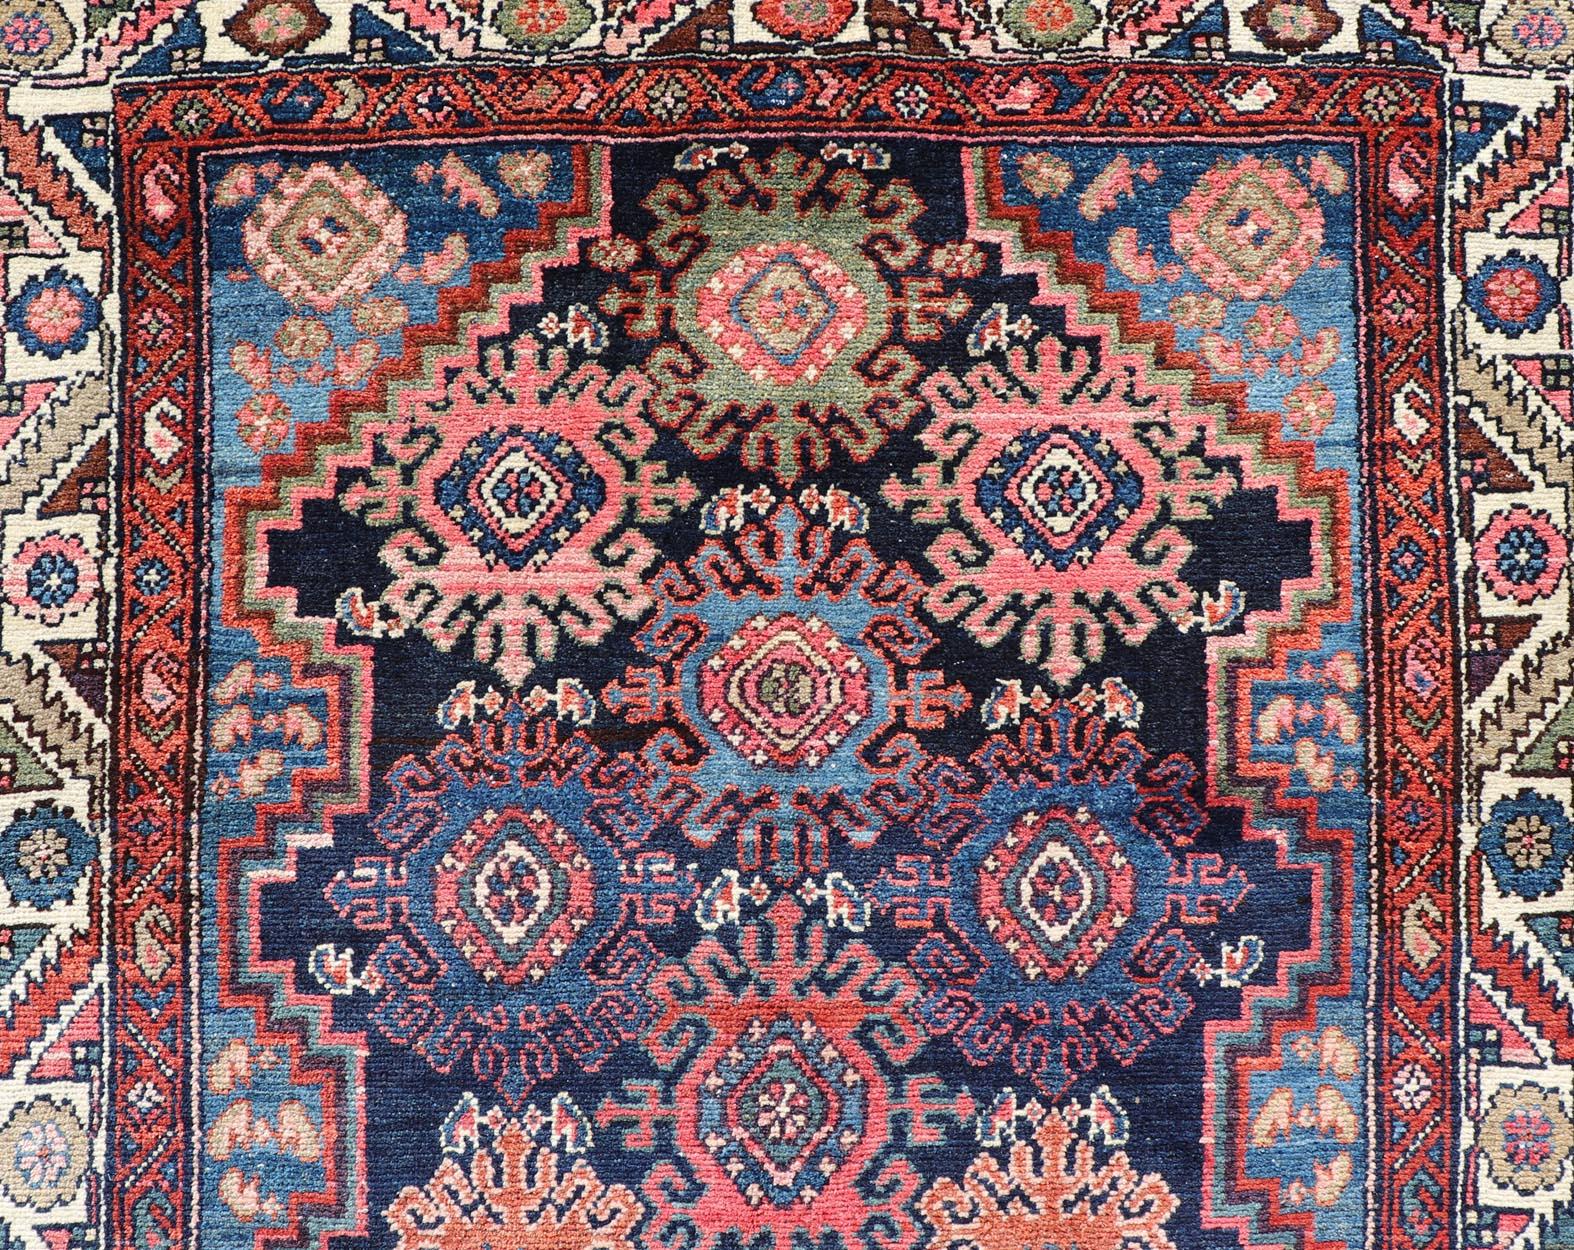 Hand-Knotted Antique Persian Hamadan Runner with All-Over Geometric Motifs In Jewel Tones For Sale